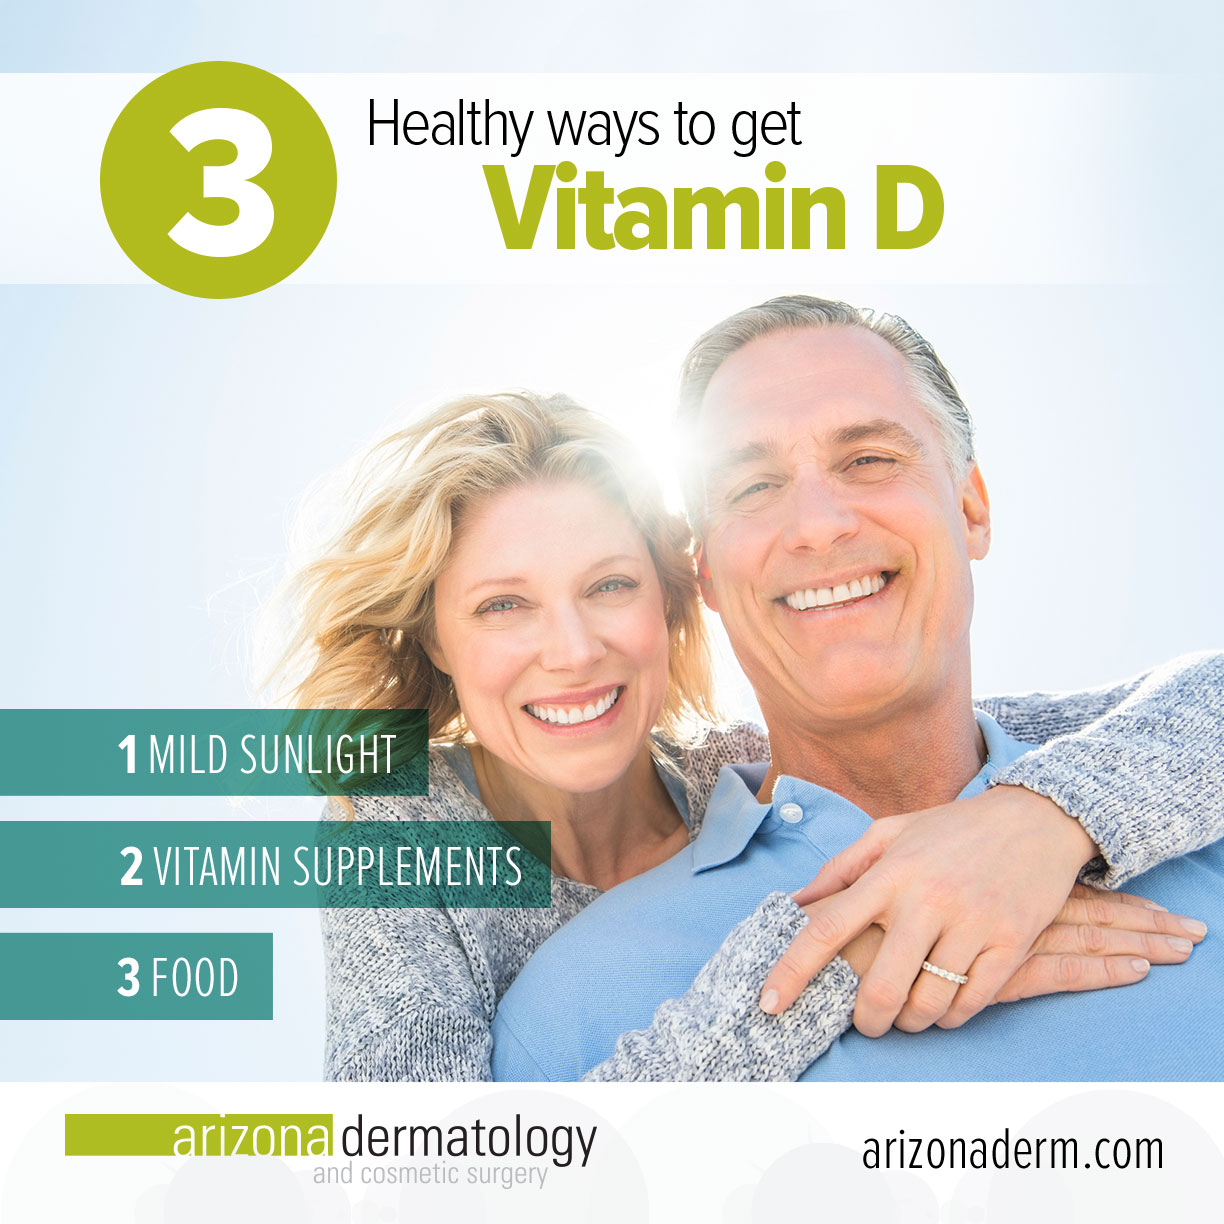 Healthy ways you can get Vitamin D